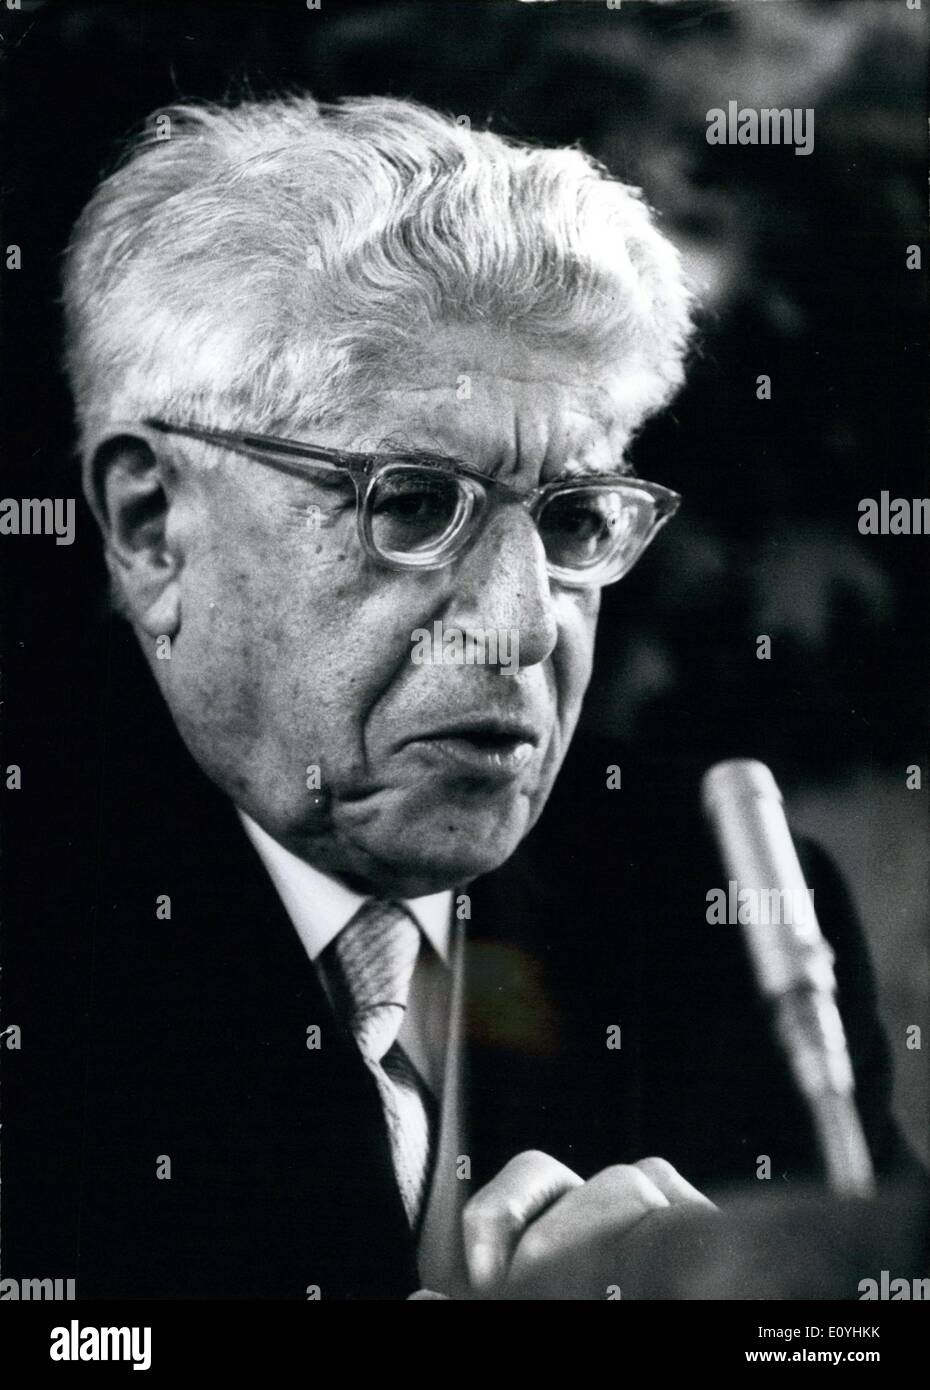 Jun. 06, 1970 - Ernst Bloch 85 years old: On July 8th, 1970, Professor Dr. Ernst Bloch is celebrating his 85th birthday. The philosopher now teaching in Tubingen left the University of Leipzig in 1961 because of political pressure of the East-German regime. In 1967 he was awarded the Price for peace of the German bock trade. In his publications Mr. Bloch is examining conditions and chances of a humanitarian socialism, the most important of which is called ''Das Prinzip Hoffnung'' (''The principle of hope' Stock Photo